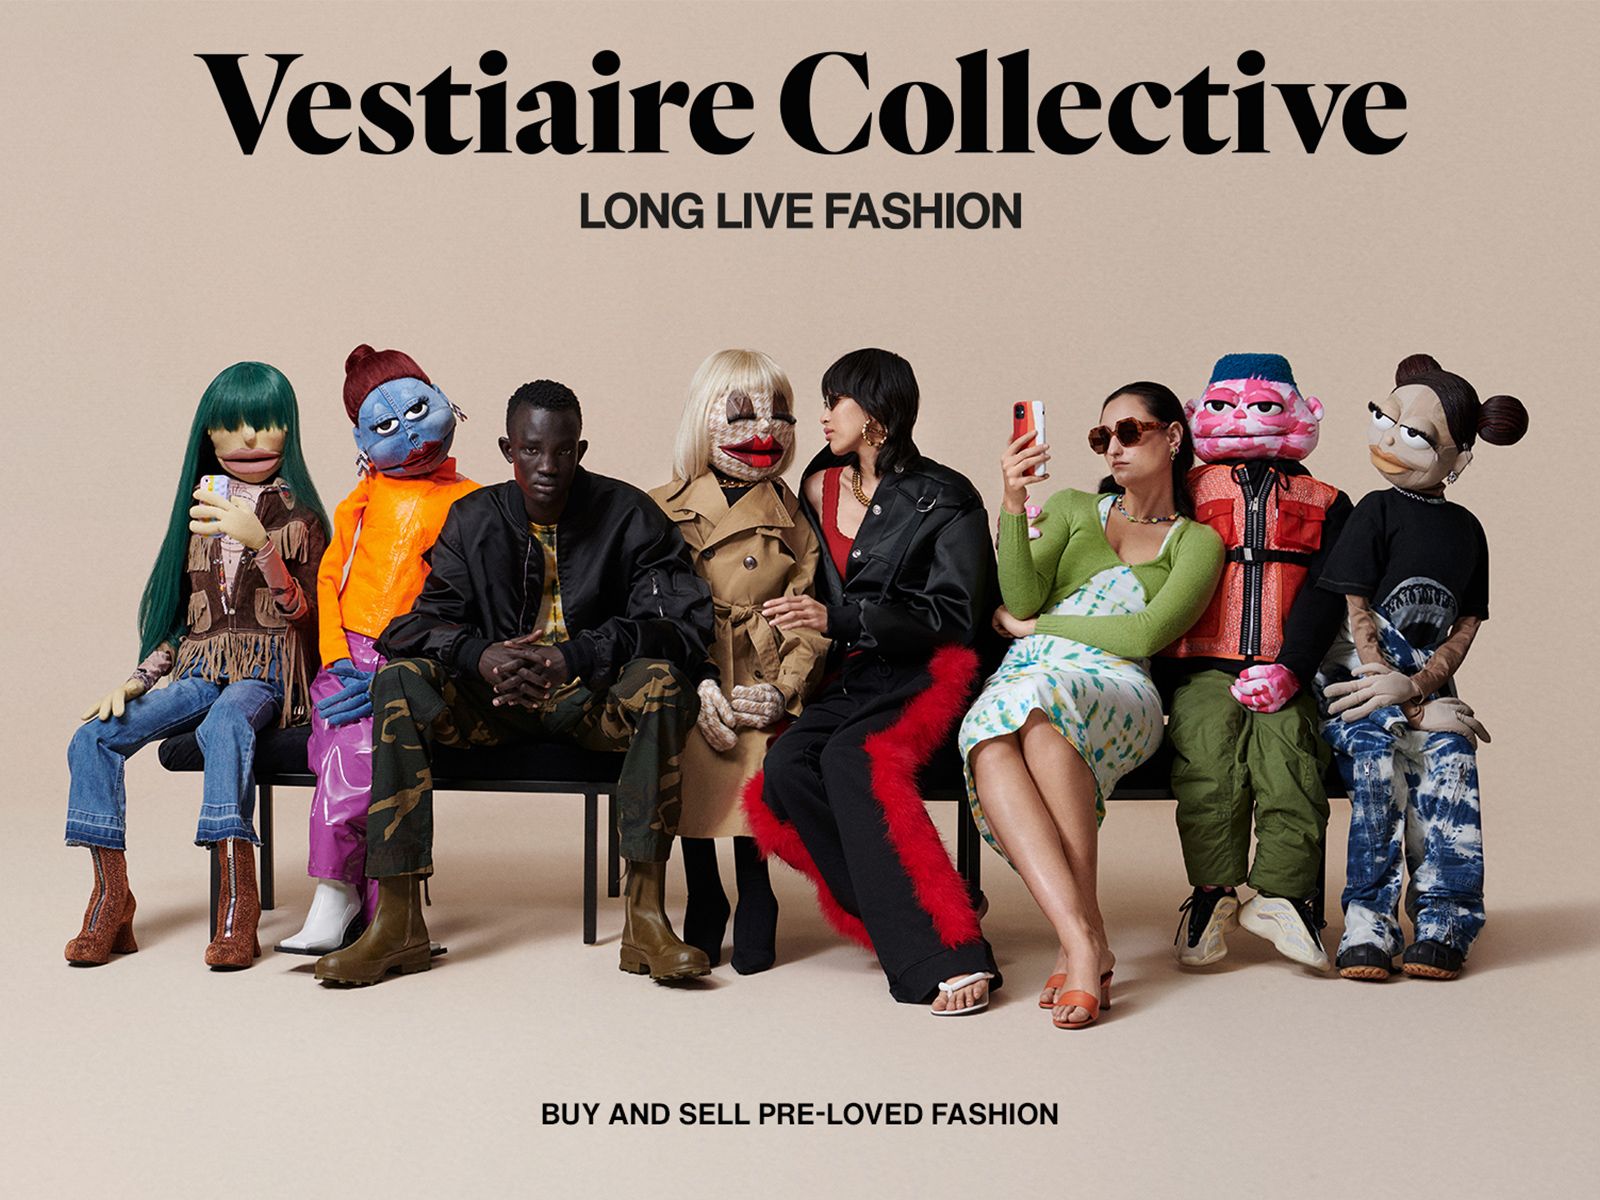 Vestiaire Collective launches “Let’s make fashion timeless” with a focus on the future of fashion